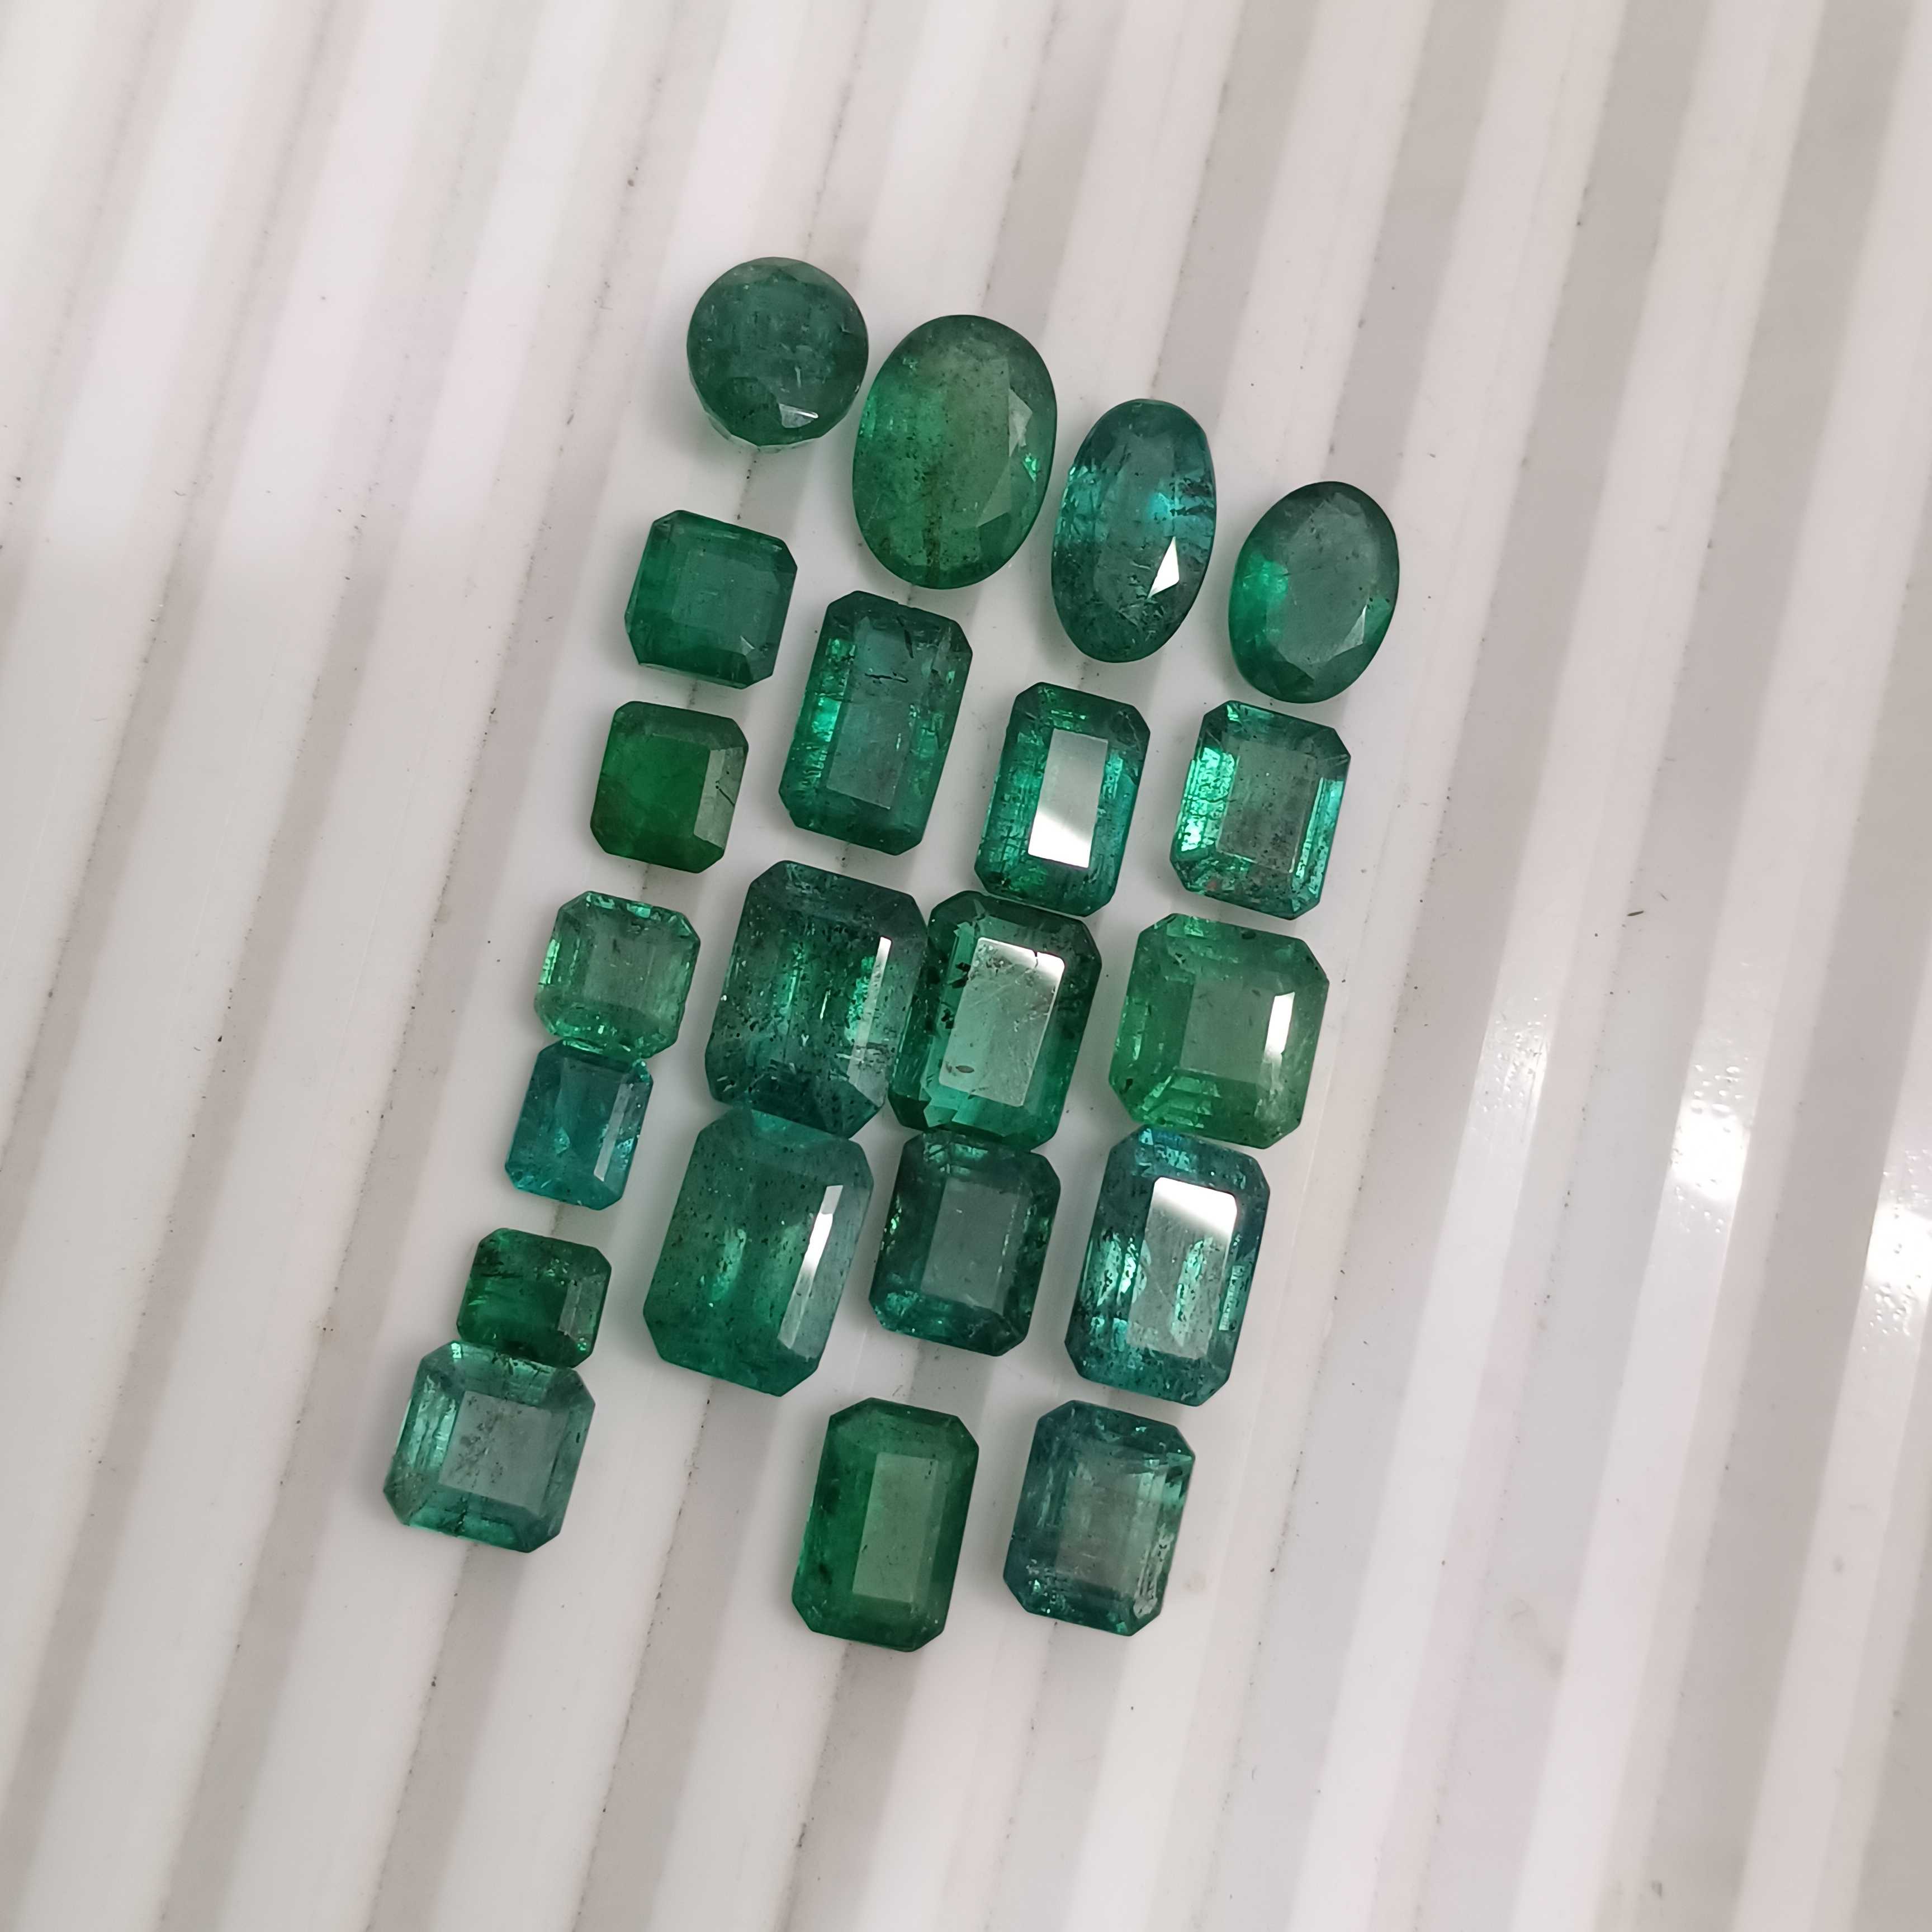 38.8ct High luster Zambian emerald parcel /